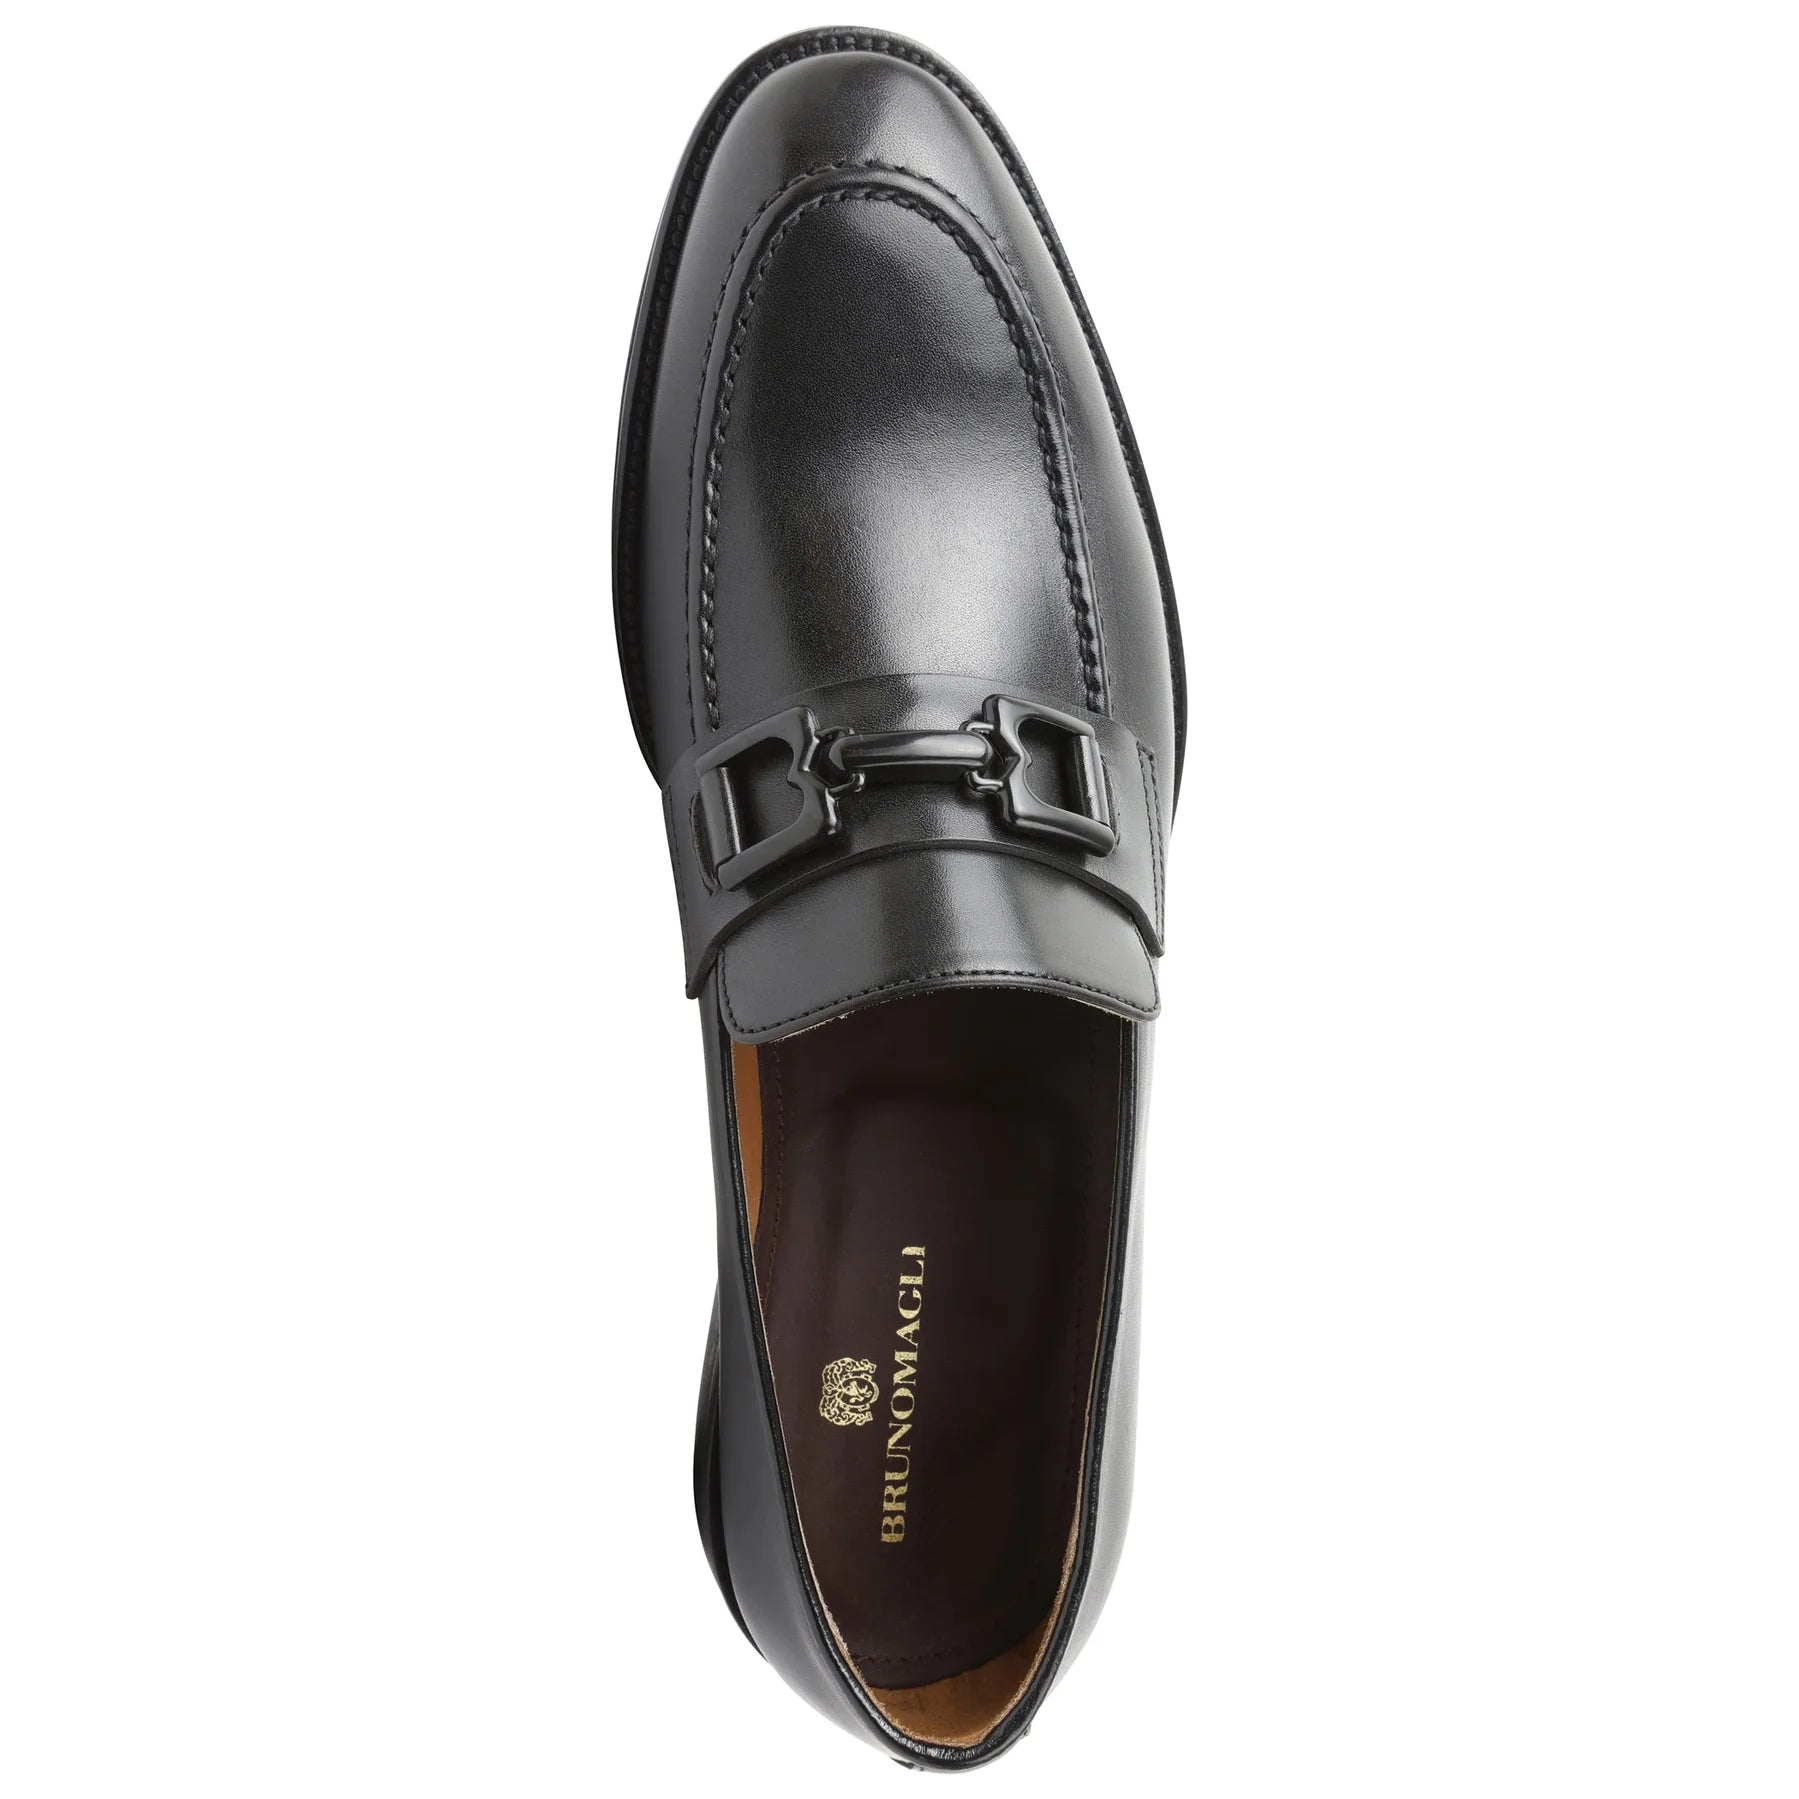 Alpha Classic Bit Leather Loafer